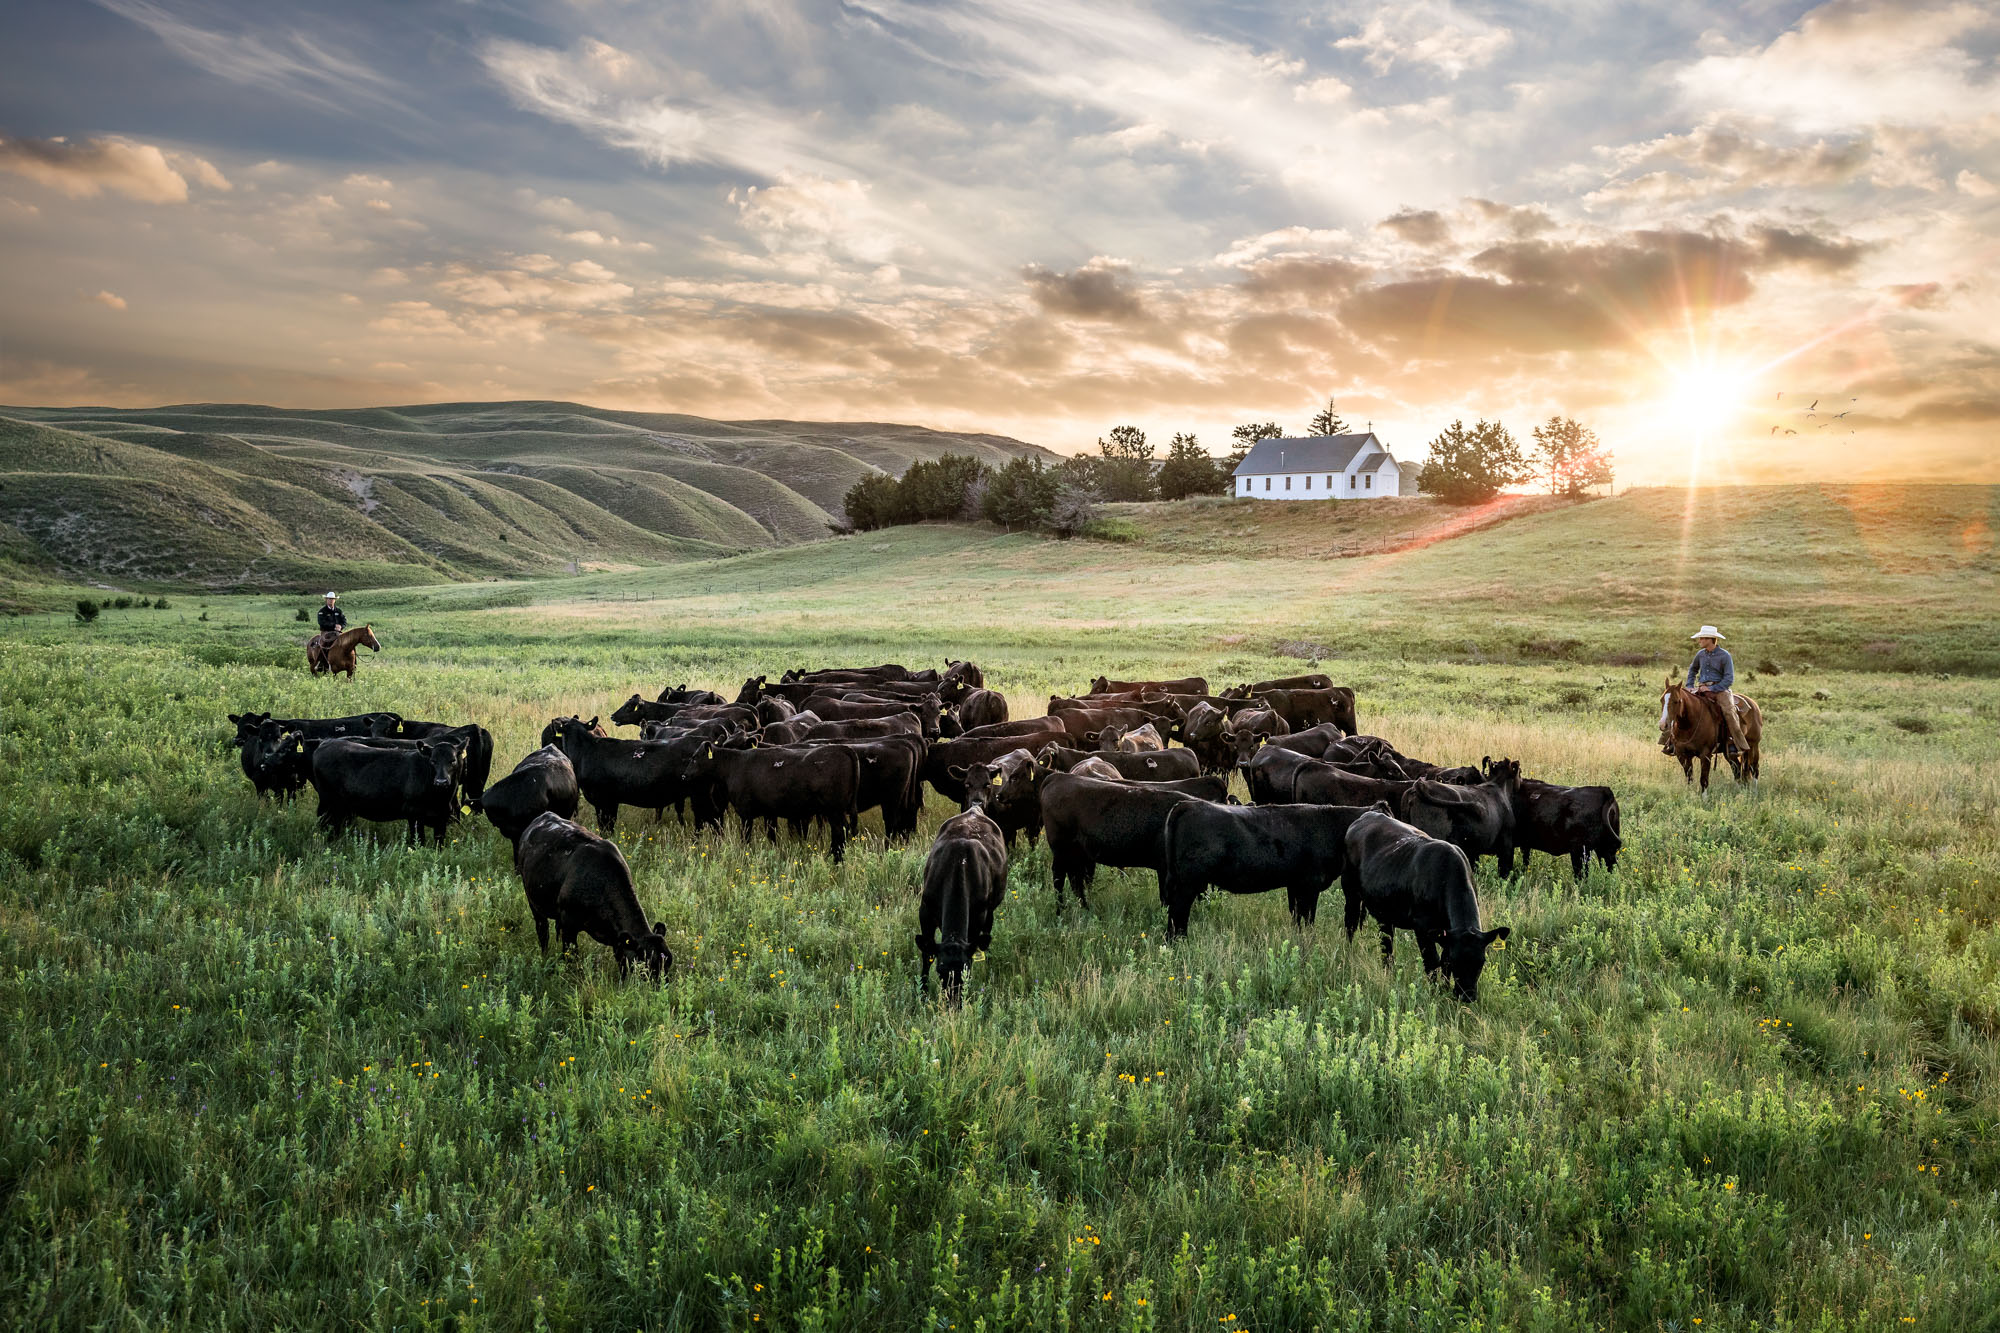 cowboys on horseback in field with angus cows cattle herd in Nebraska with church  in back ground at sunset sunrise